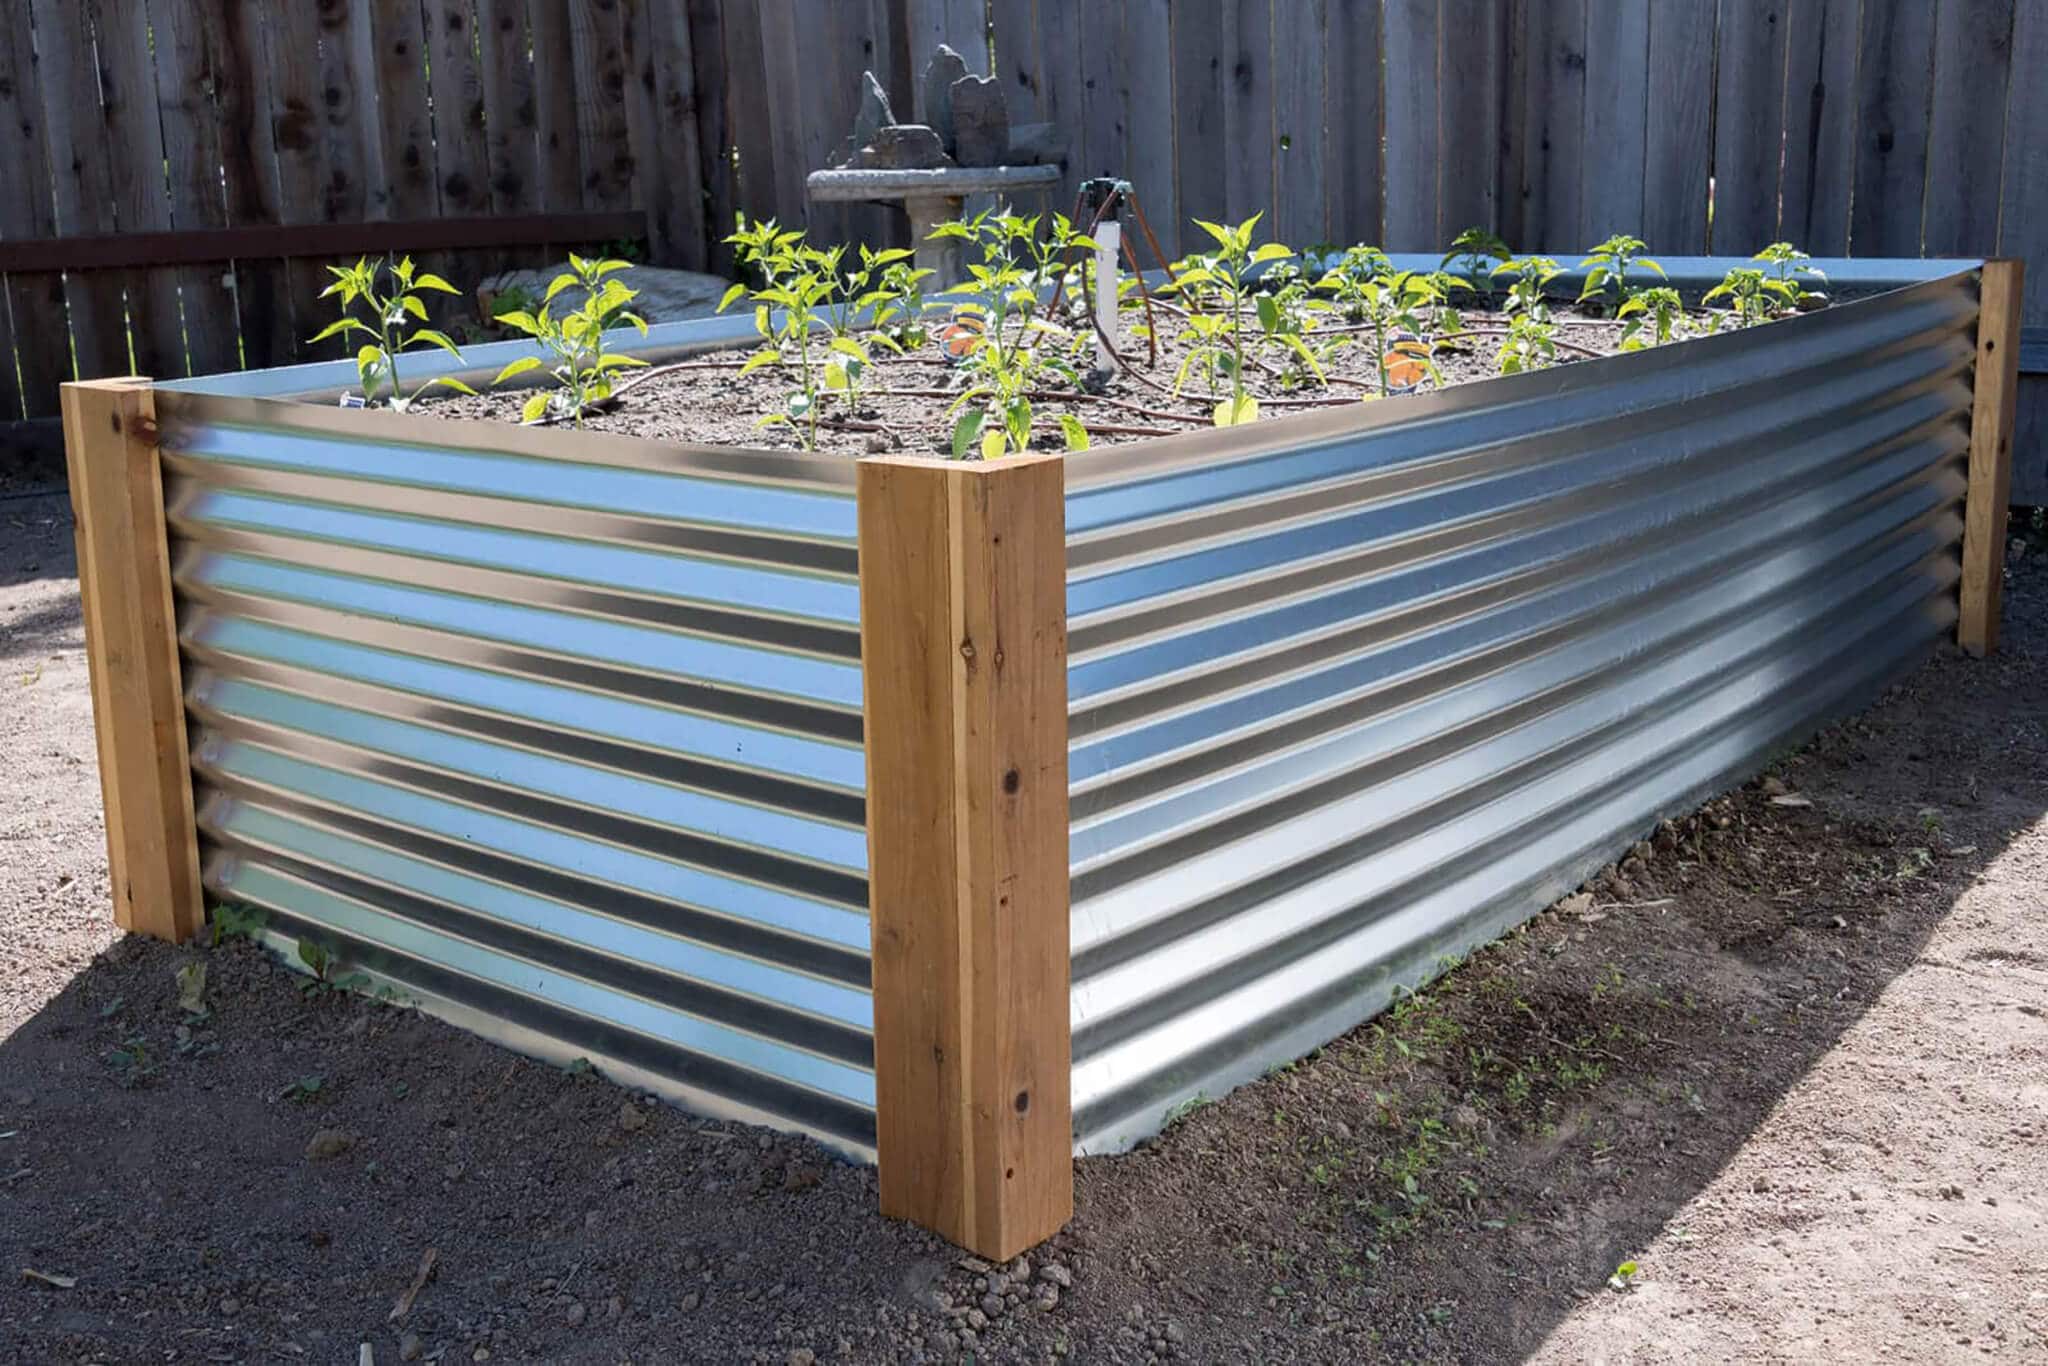 How To Build A Metal Raised Garden Bed, Corrugated Metal Raised Garden Beds Canada